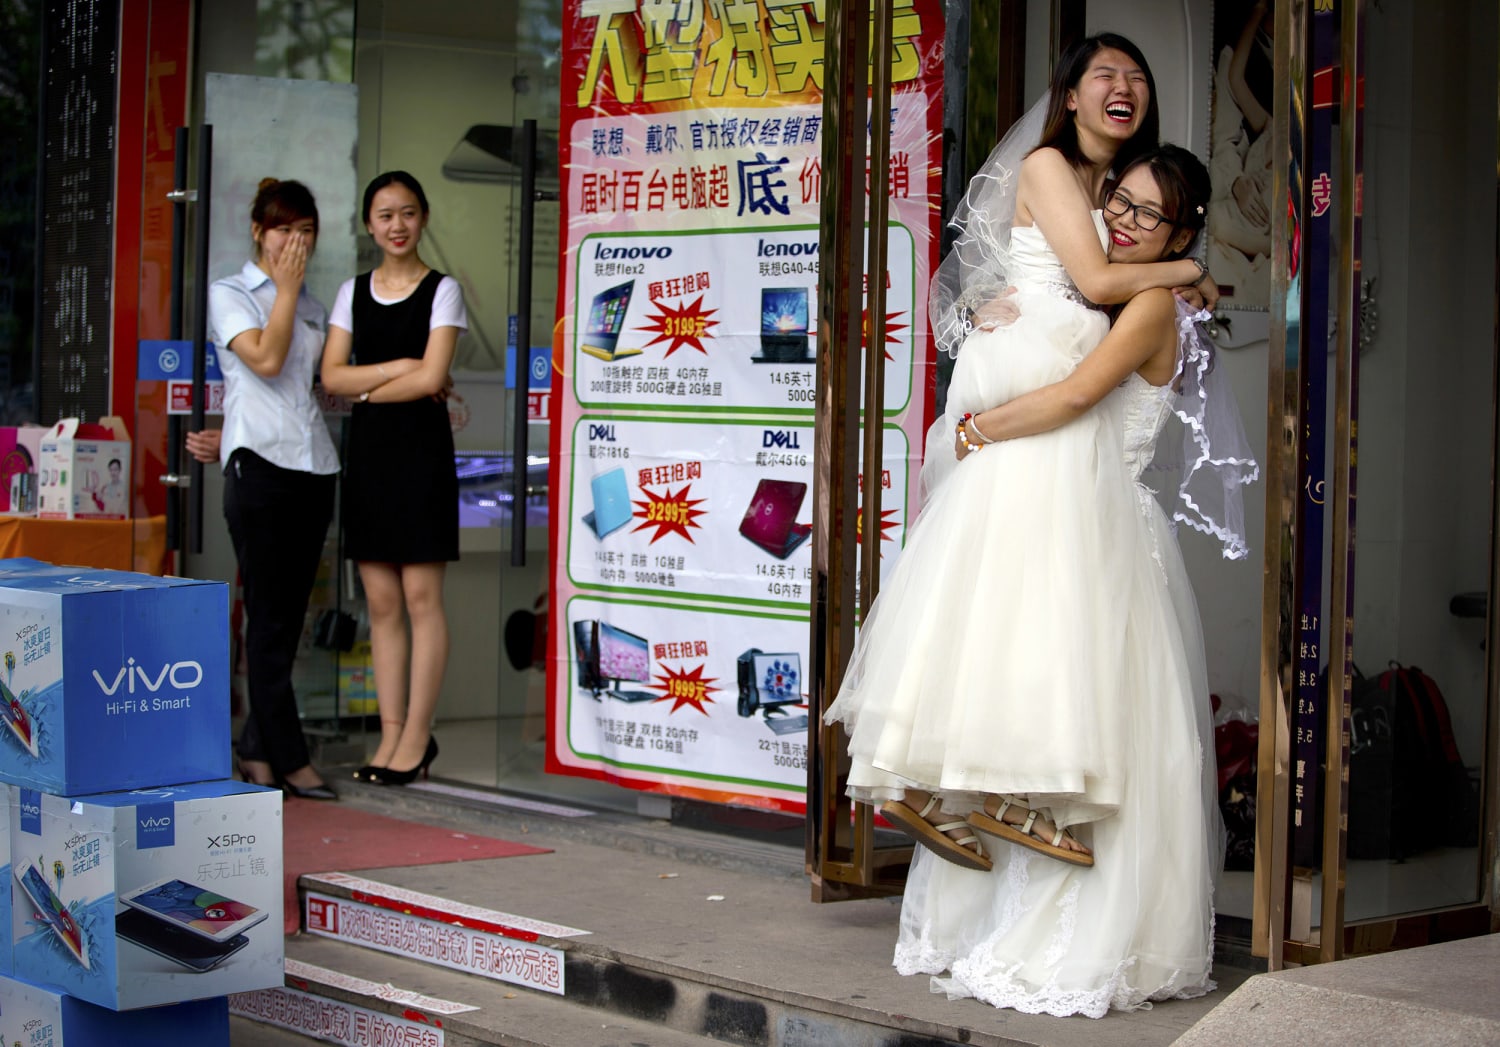 Why is China raising the prospect of same-sex marriage?